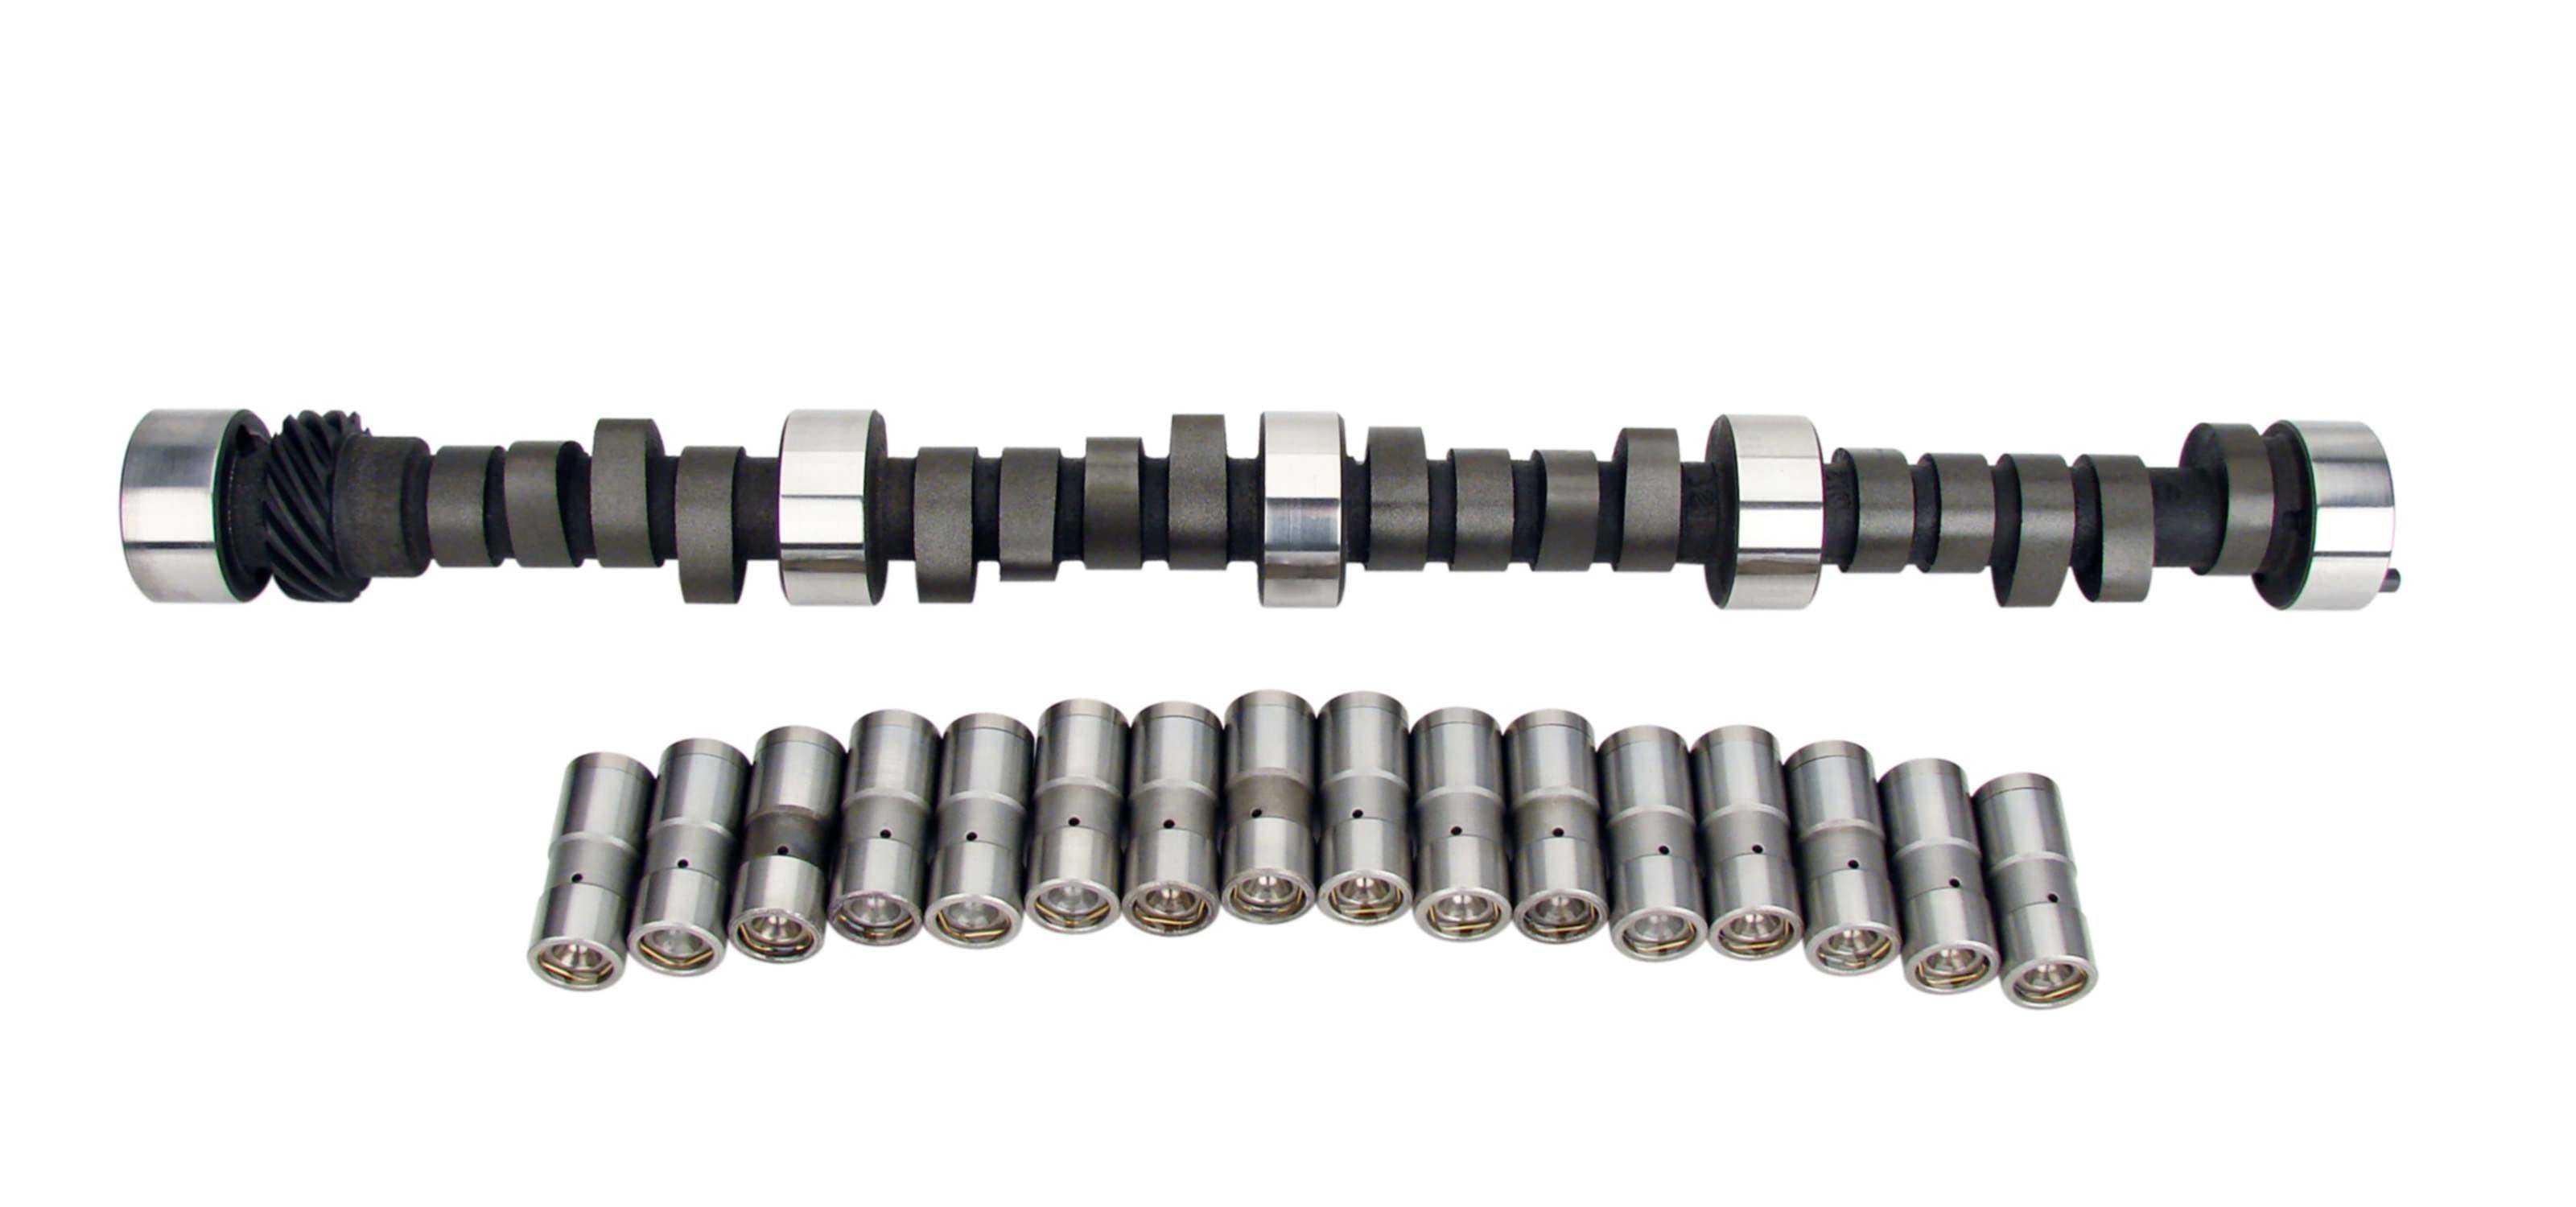 Competition Cams CL12-670-4 Nostalgia Plus Camshaft/Lifter Kit